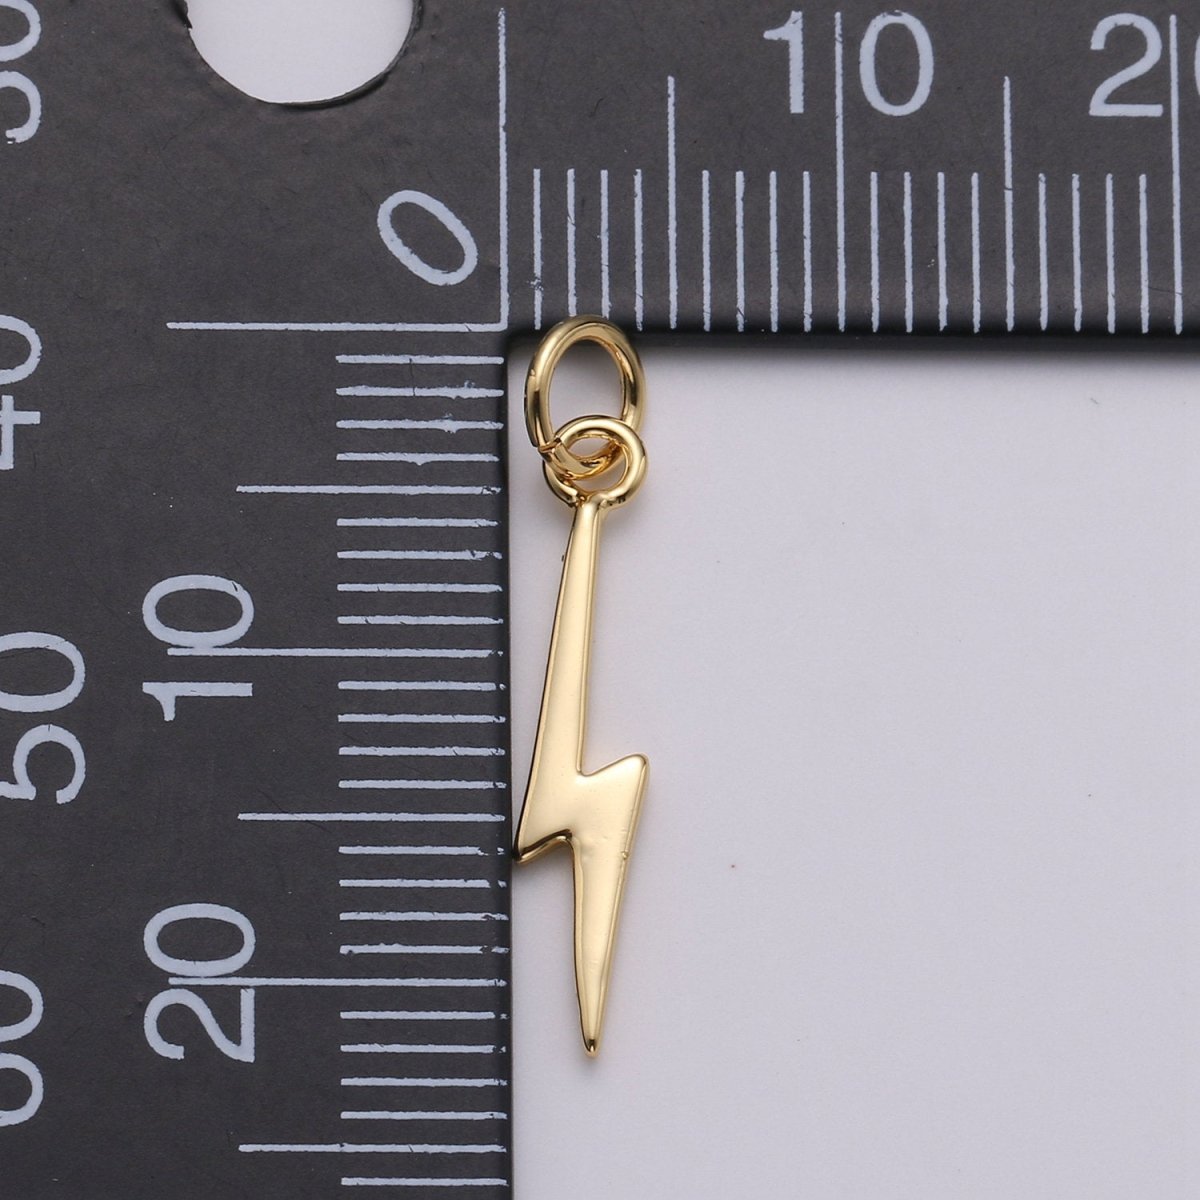 Gold Filled Lightning Bolt Charms, Silver Bolt, Wizard Charm, Thunder Pendant 22 x 5mm Dainty Charm for Necklace Bracelet Earring Supply D-355 D-356 - DLUXCA